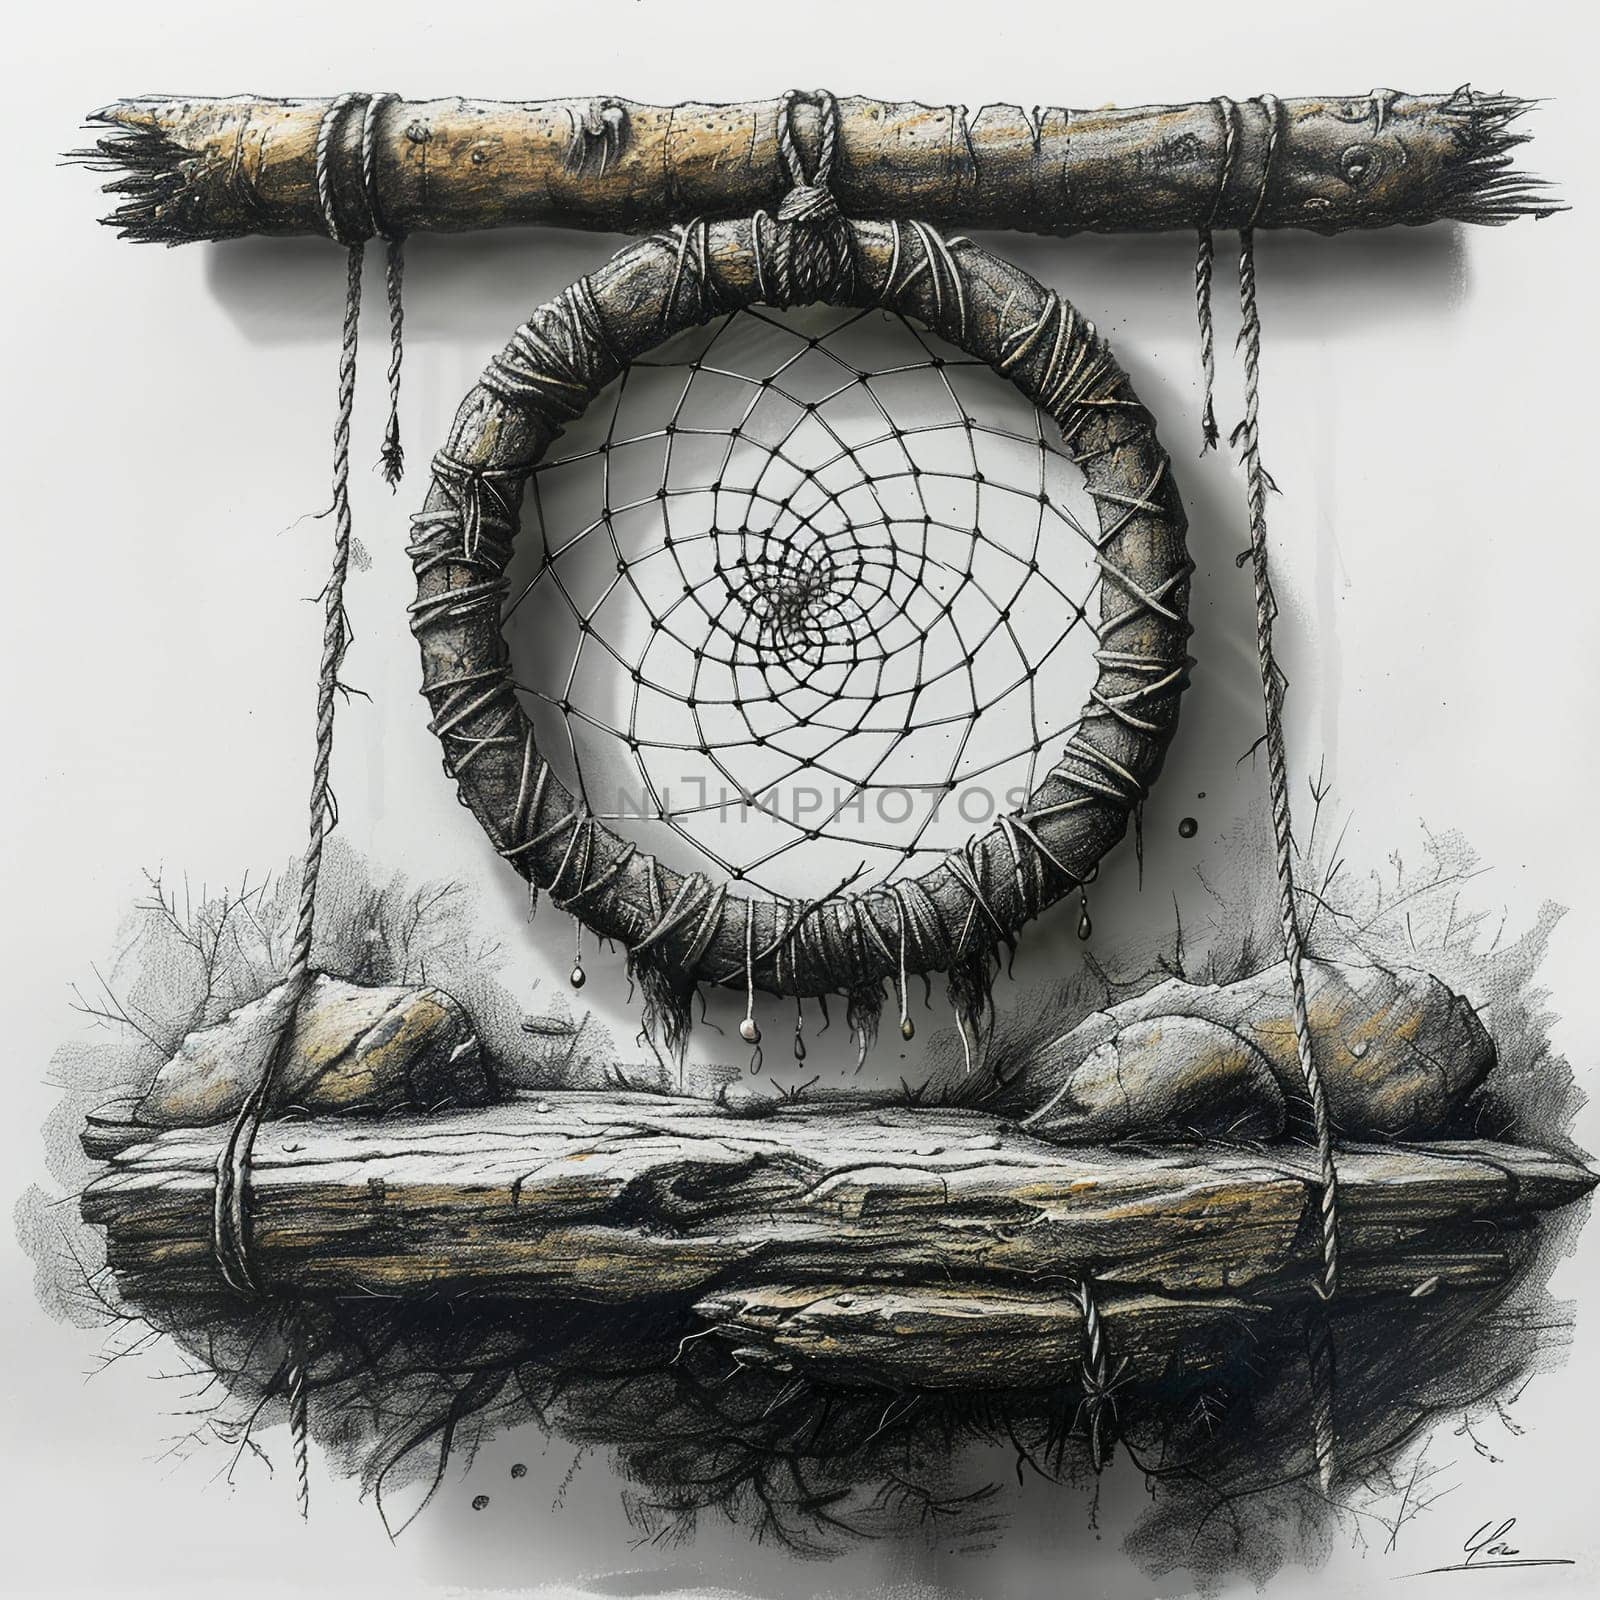 Fantasy concept sketch of dreamcatcher netting bad dreams for World Sleep Day. by Benzoix